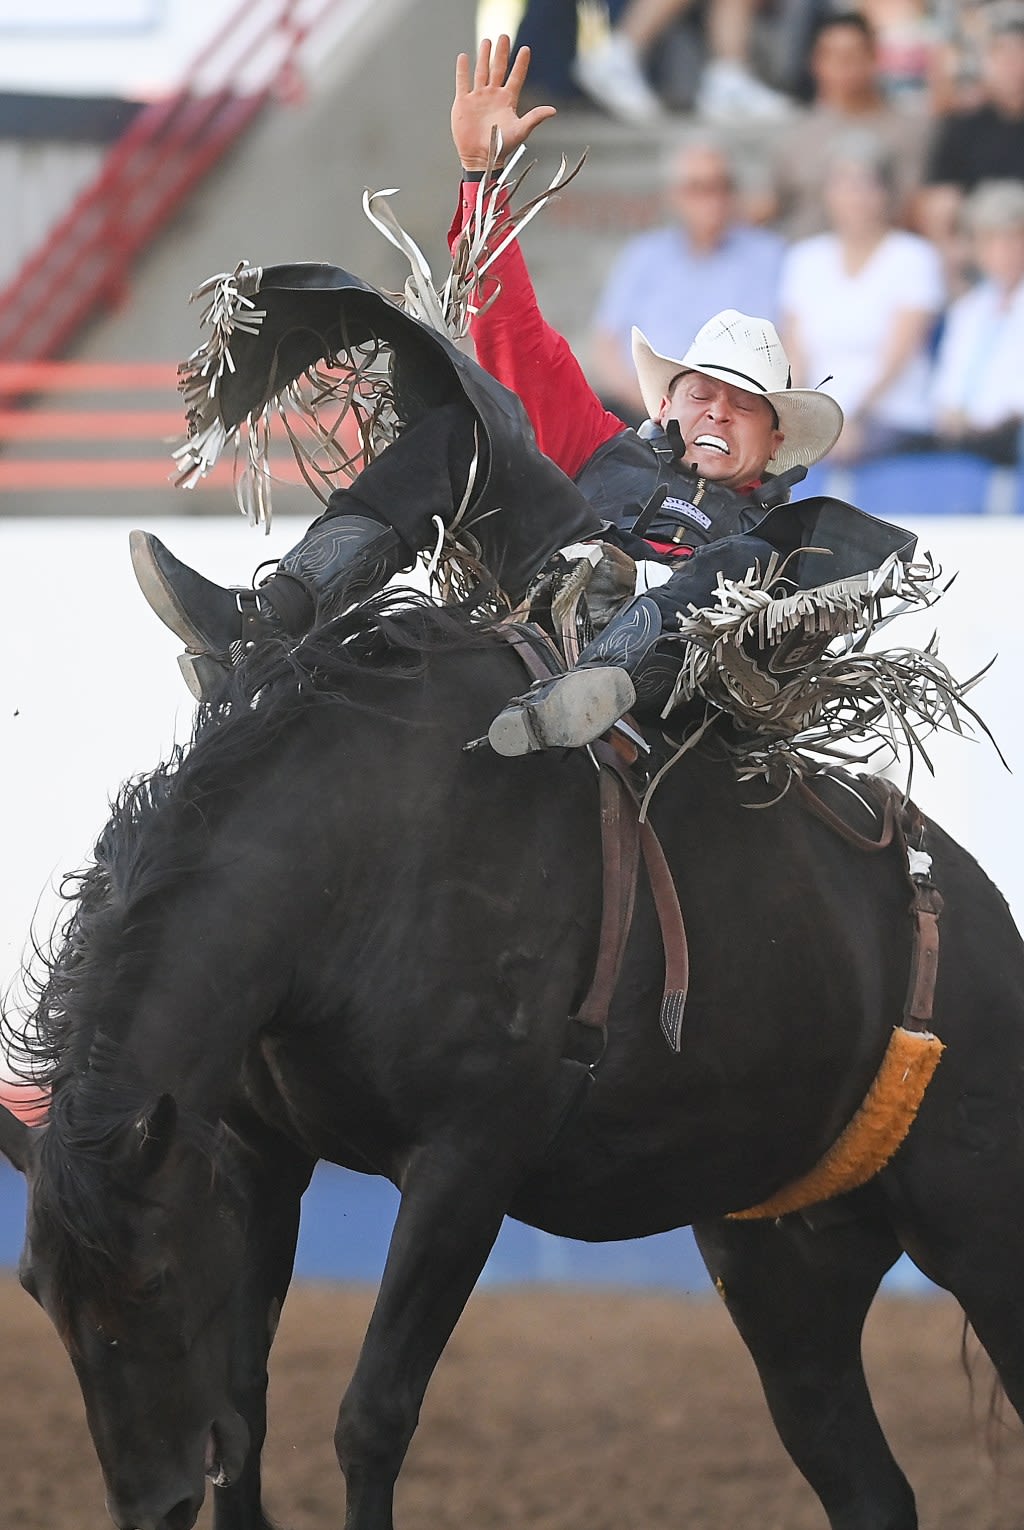 Dalton Sanchez drives his way to a top bull riding score at the Greeley Stampede rodeo